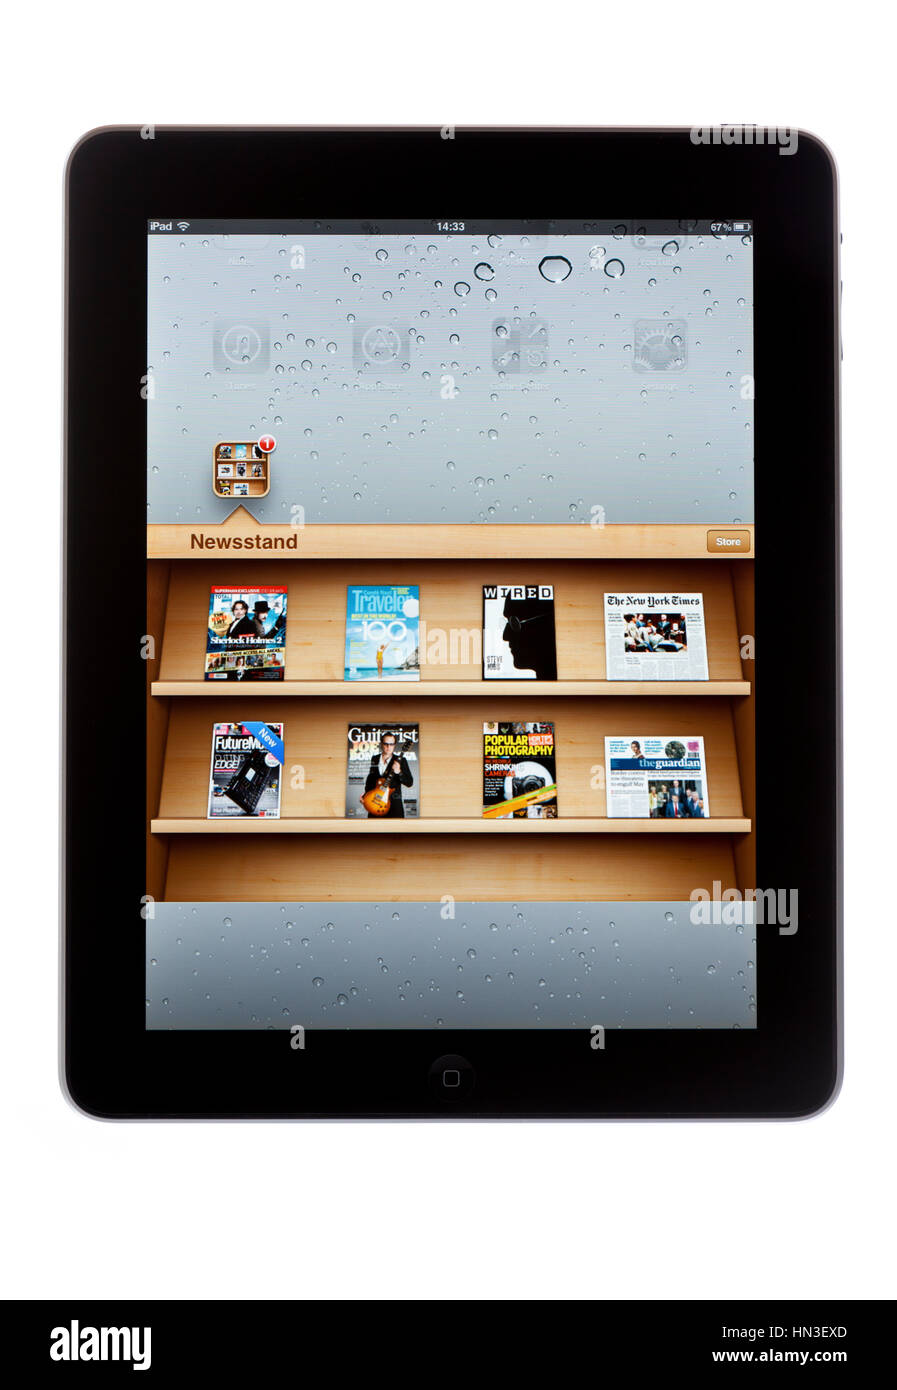 BATH, UK - NOVEMBER 8, 2011: An Apple iPad displaying the Newsstand application against a white background. Newsstand allows users to download iPad ed Stock Photo